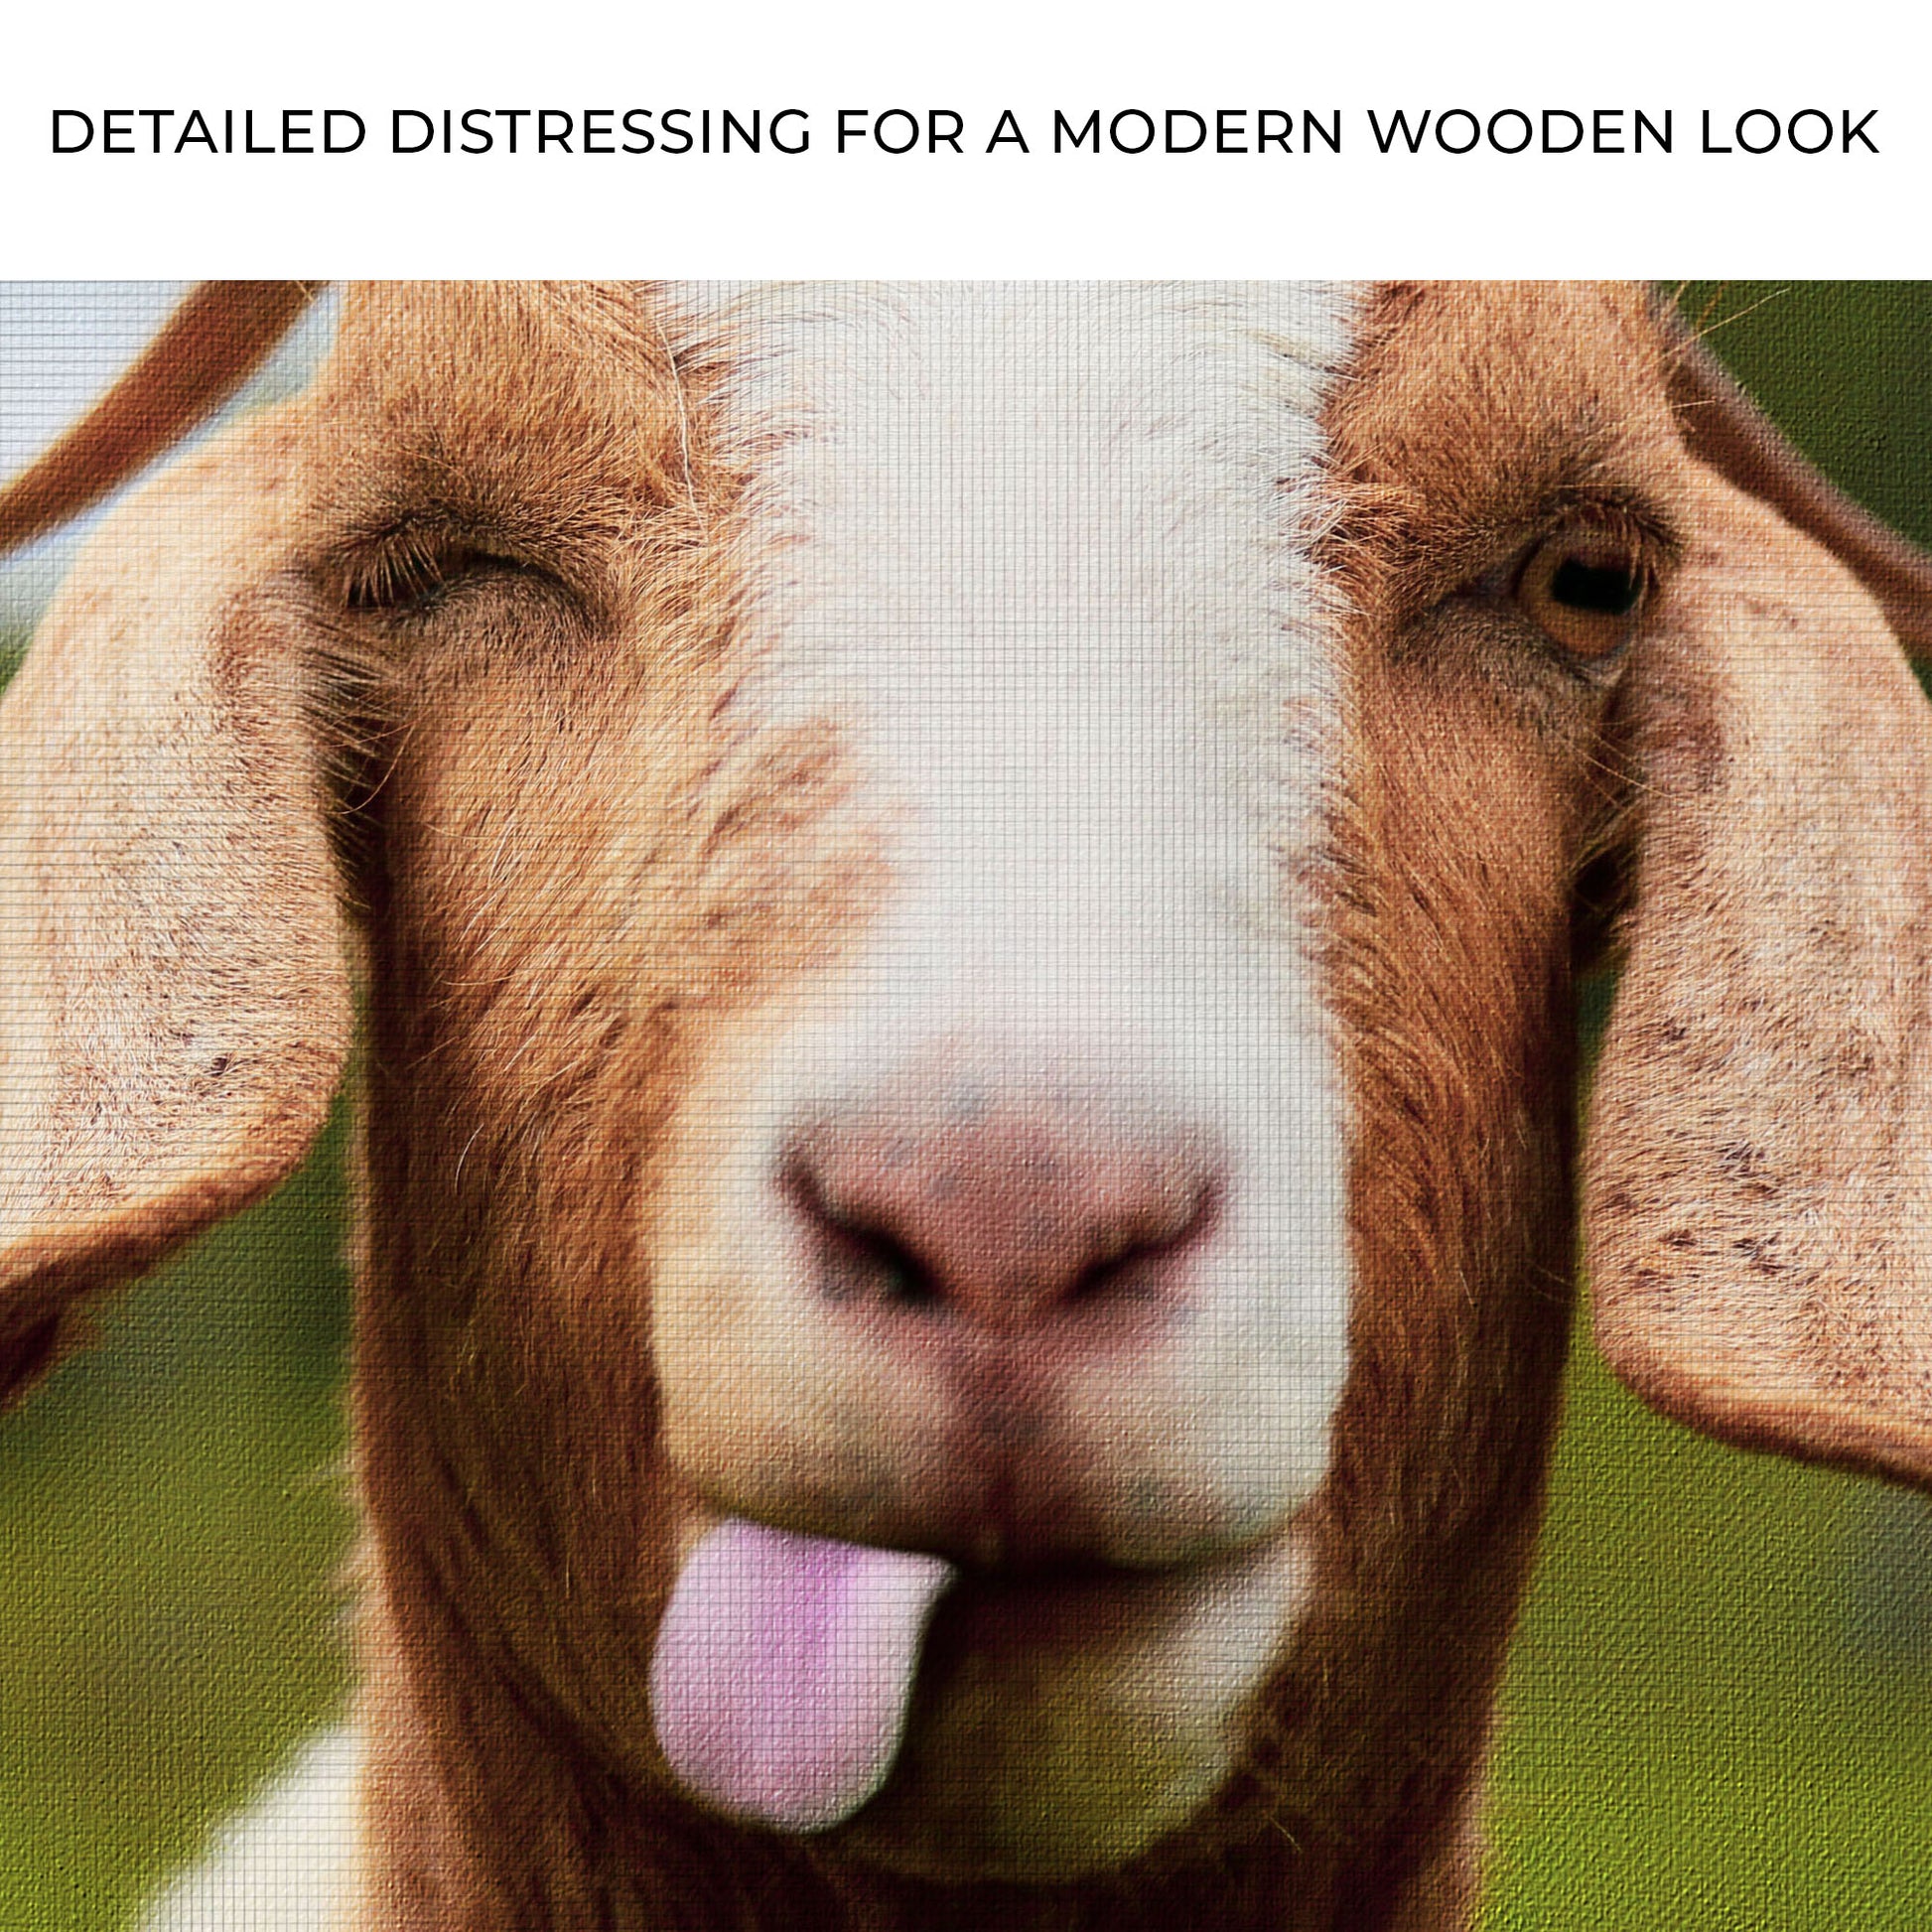 Wacky Goat Canvas Wall Art Zoom - Image by Tailored Canvases